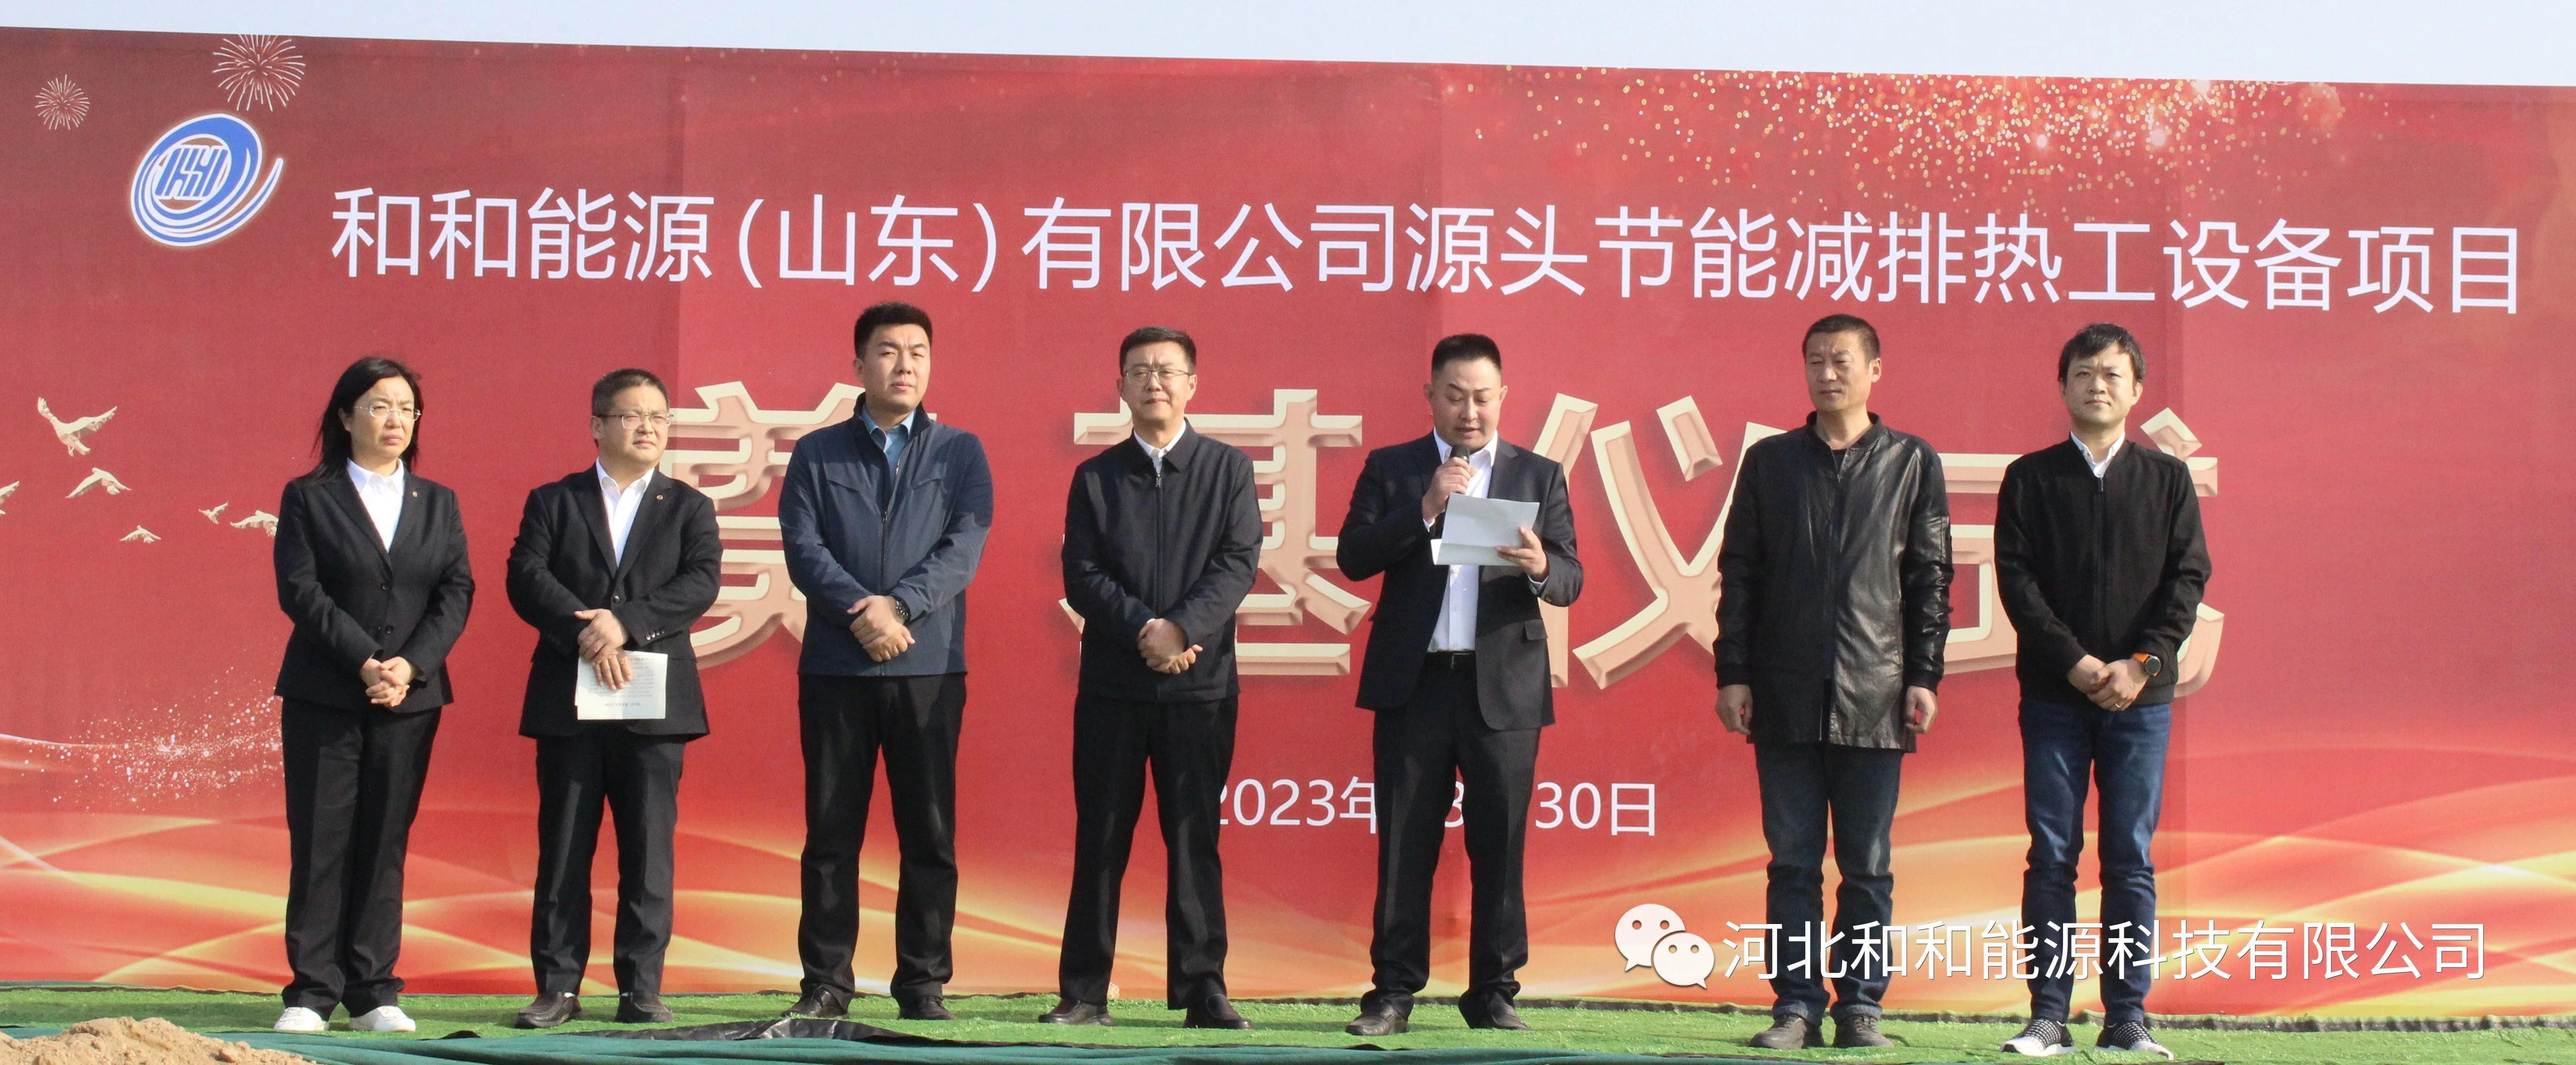 Groundbreaking ceremony for the source energy saving and emission reduction thermal equipment project of Hehe Energy (Shandong) Co., Ltd.